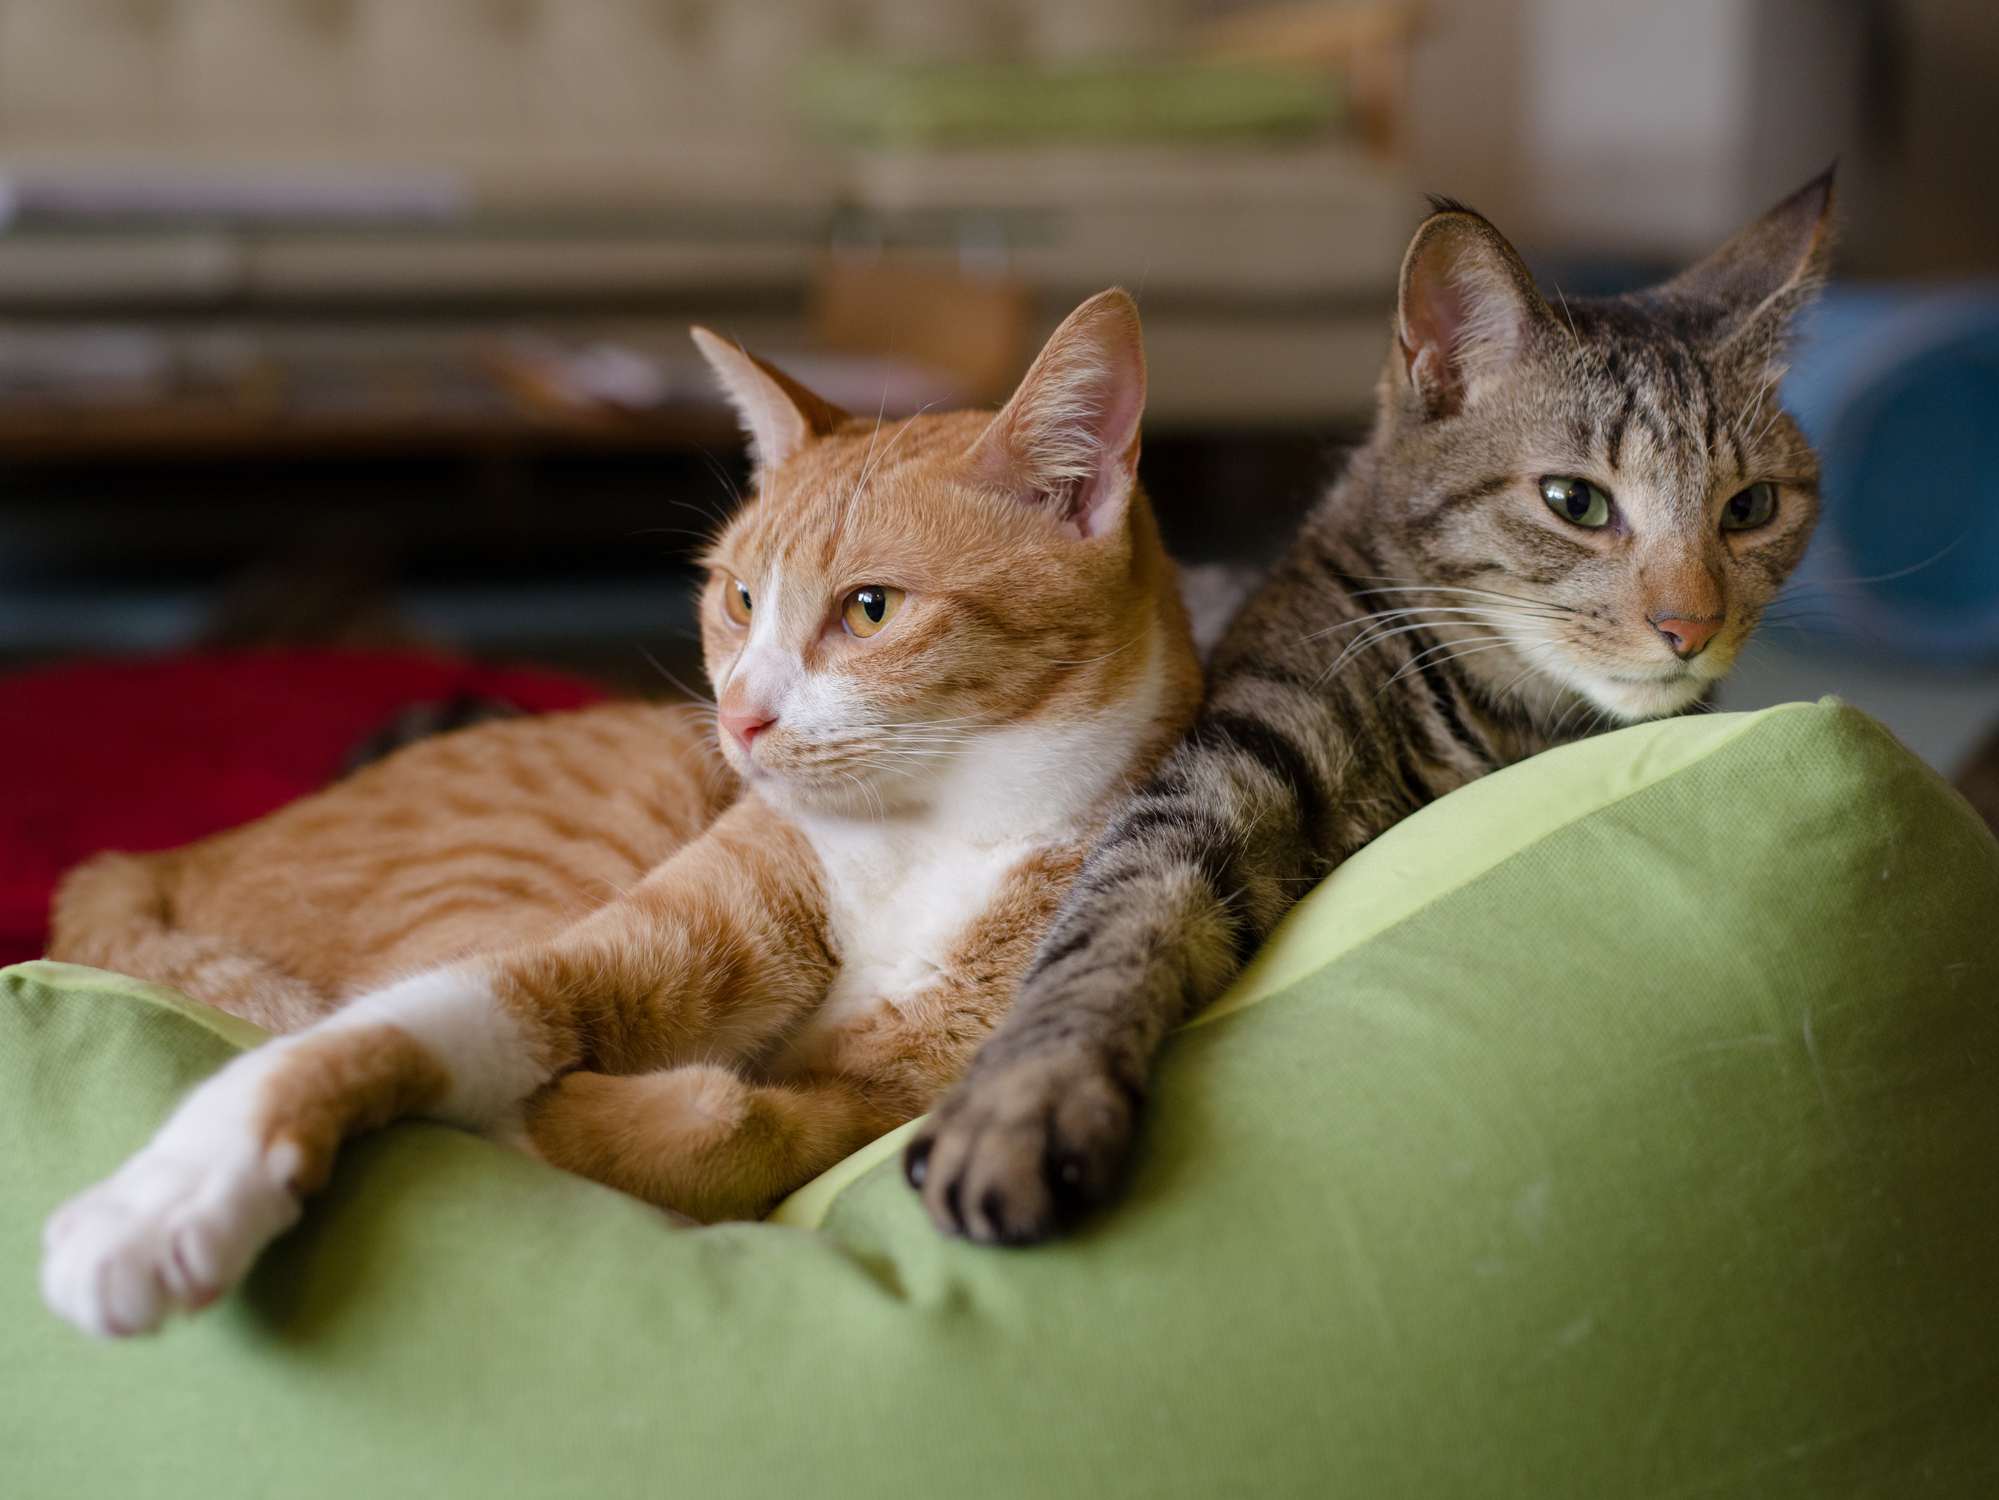 Two cats relaxing on a green cushion